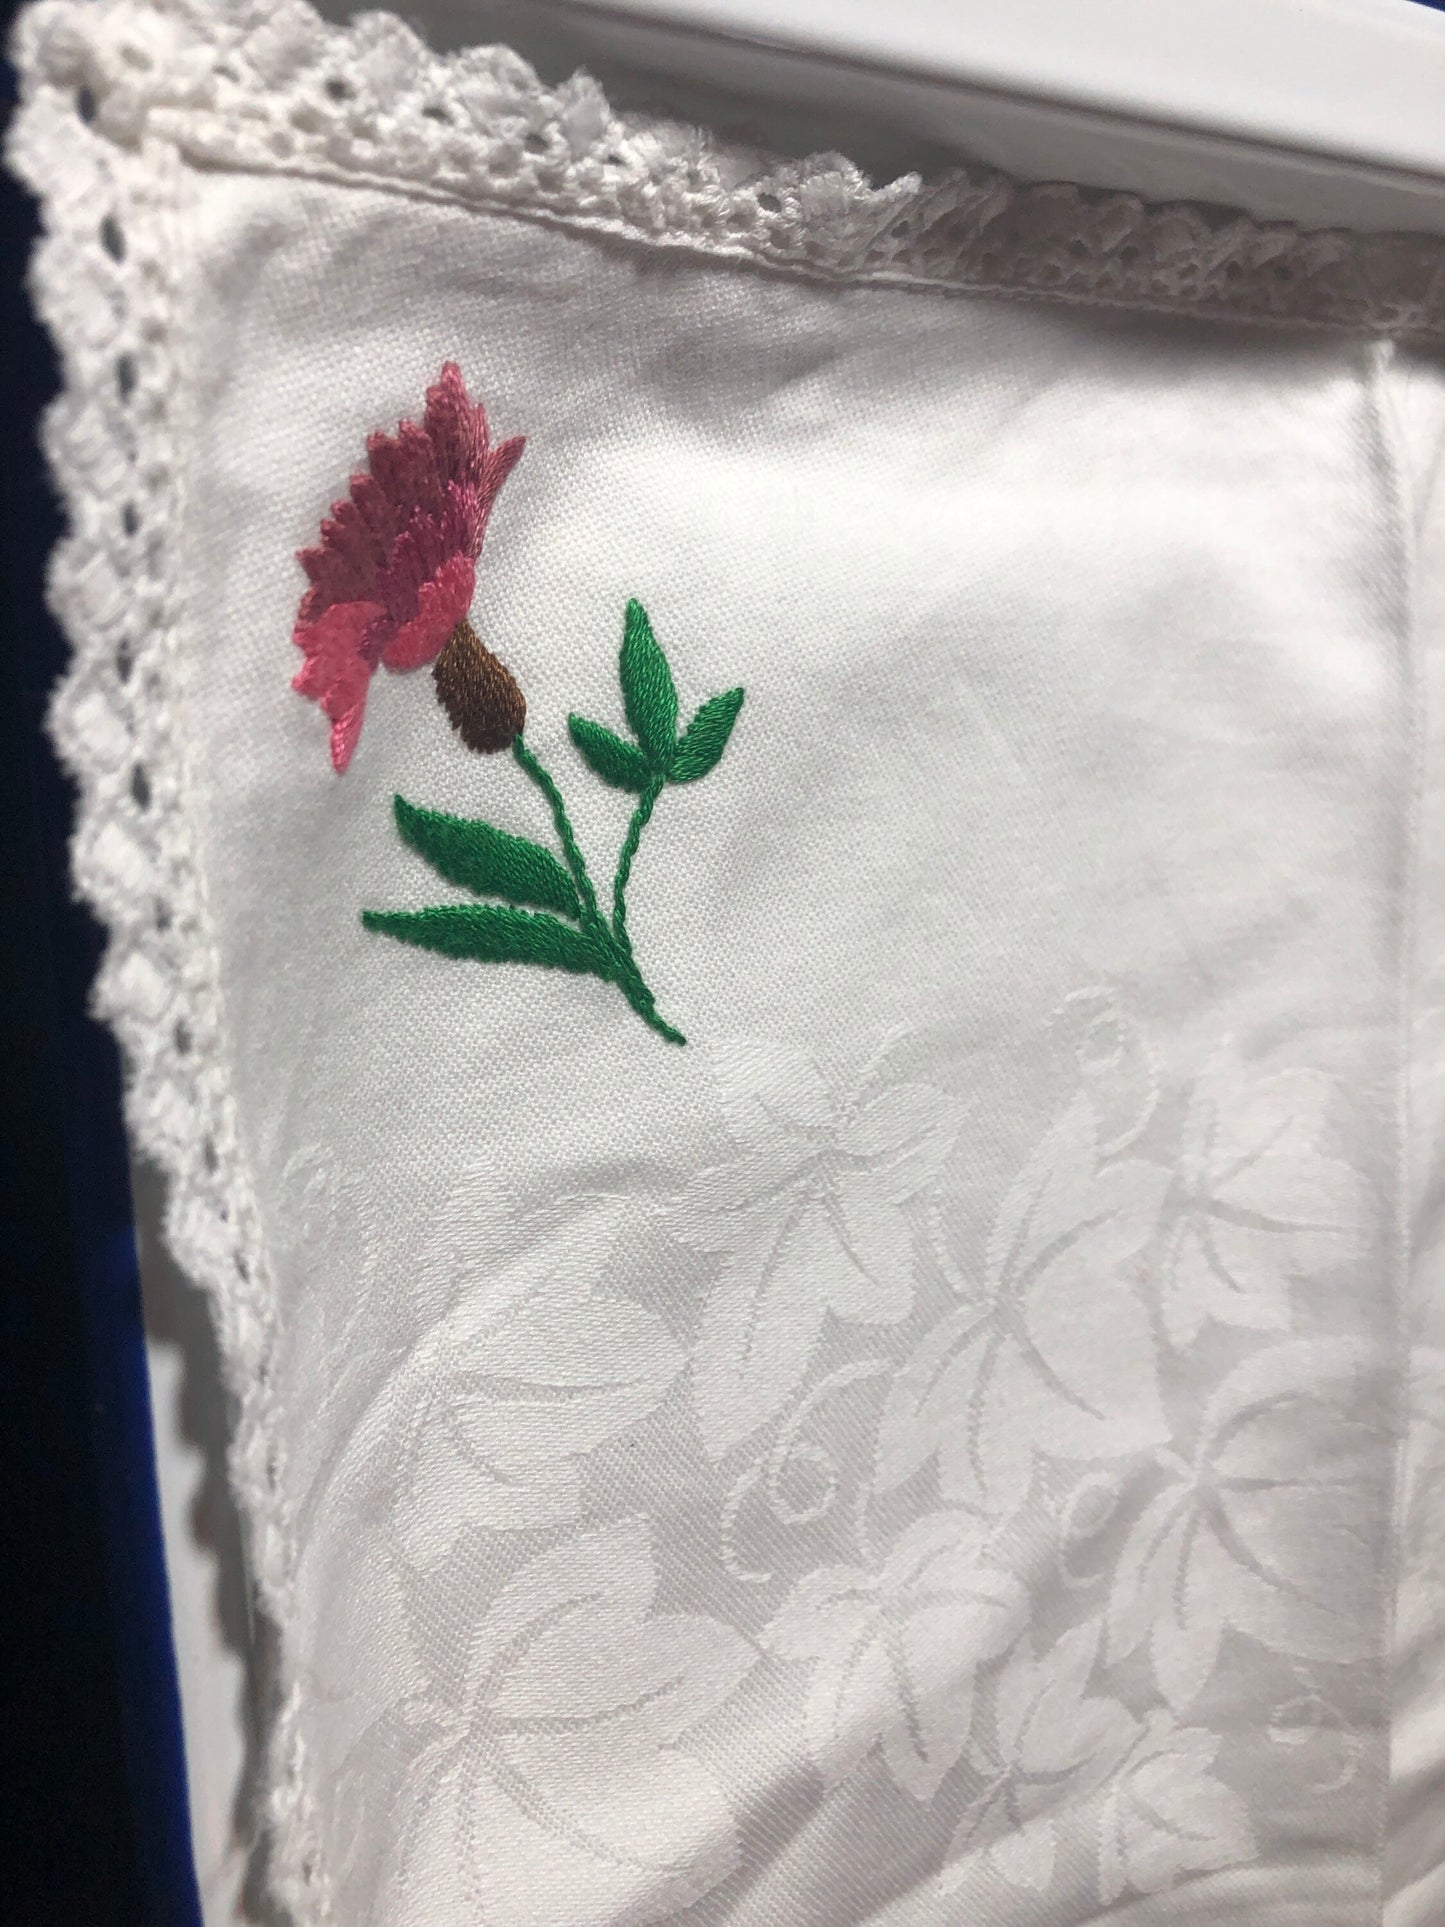 Vintage rectangular tray cloth or dressing table cloth damask white cotton pink embroidered